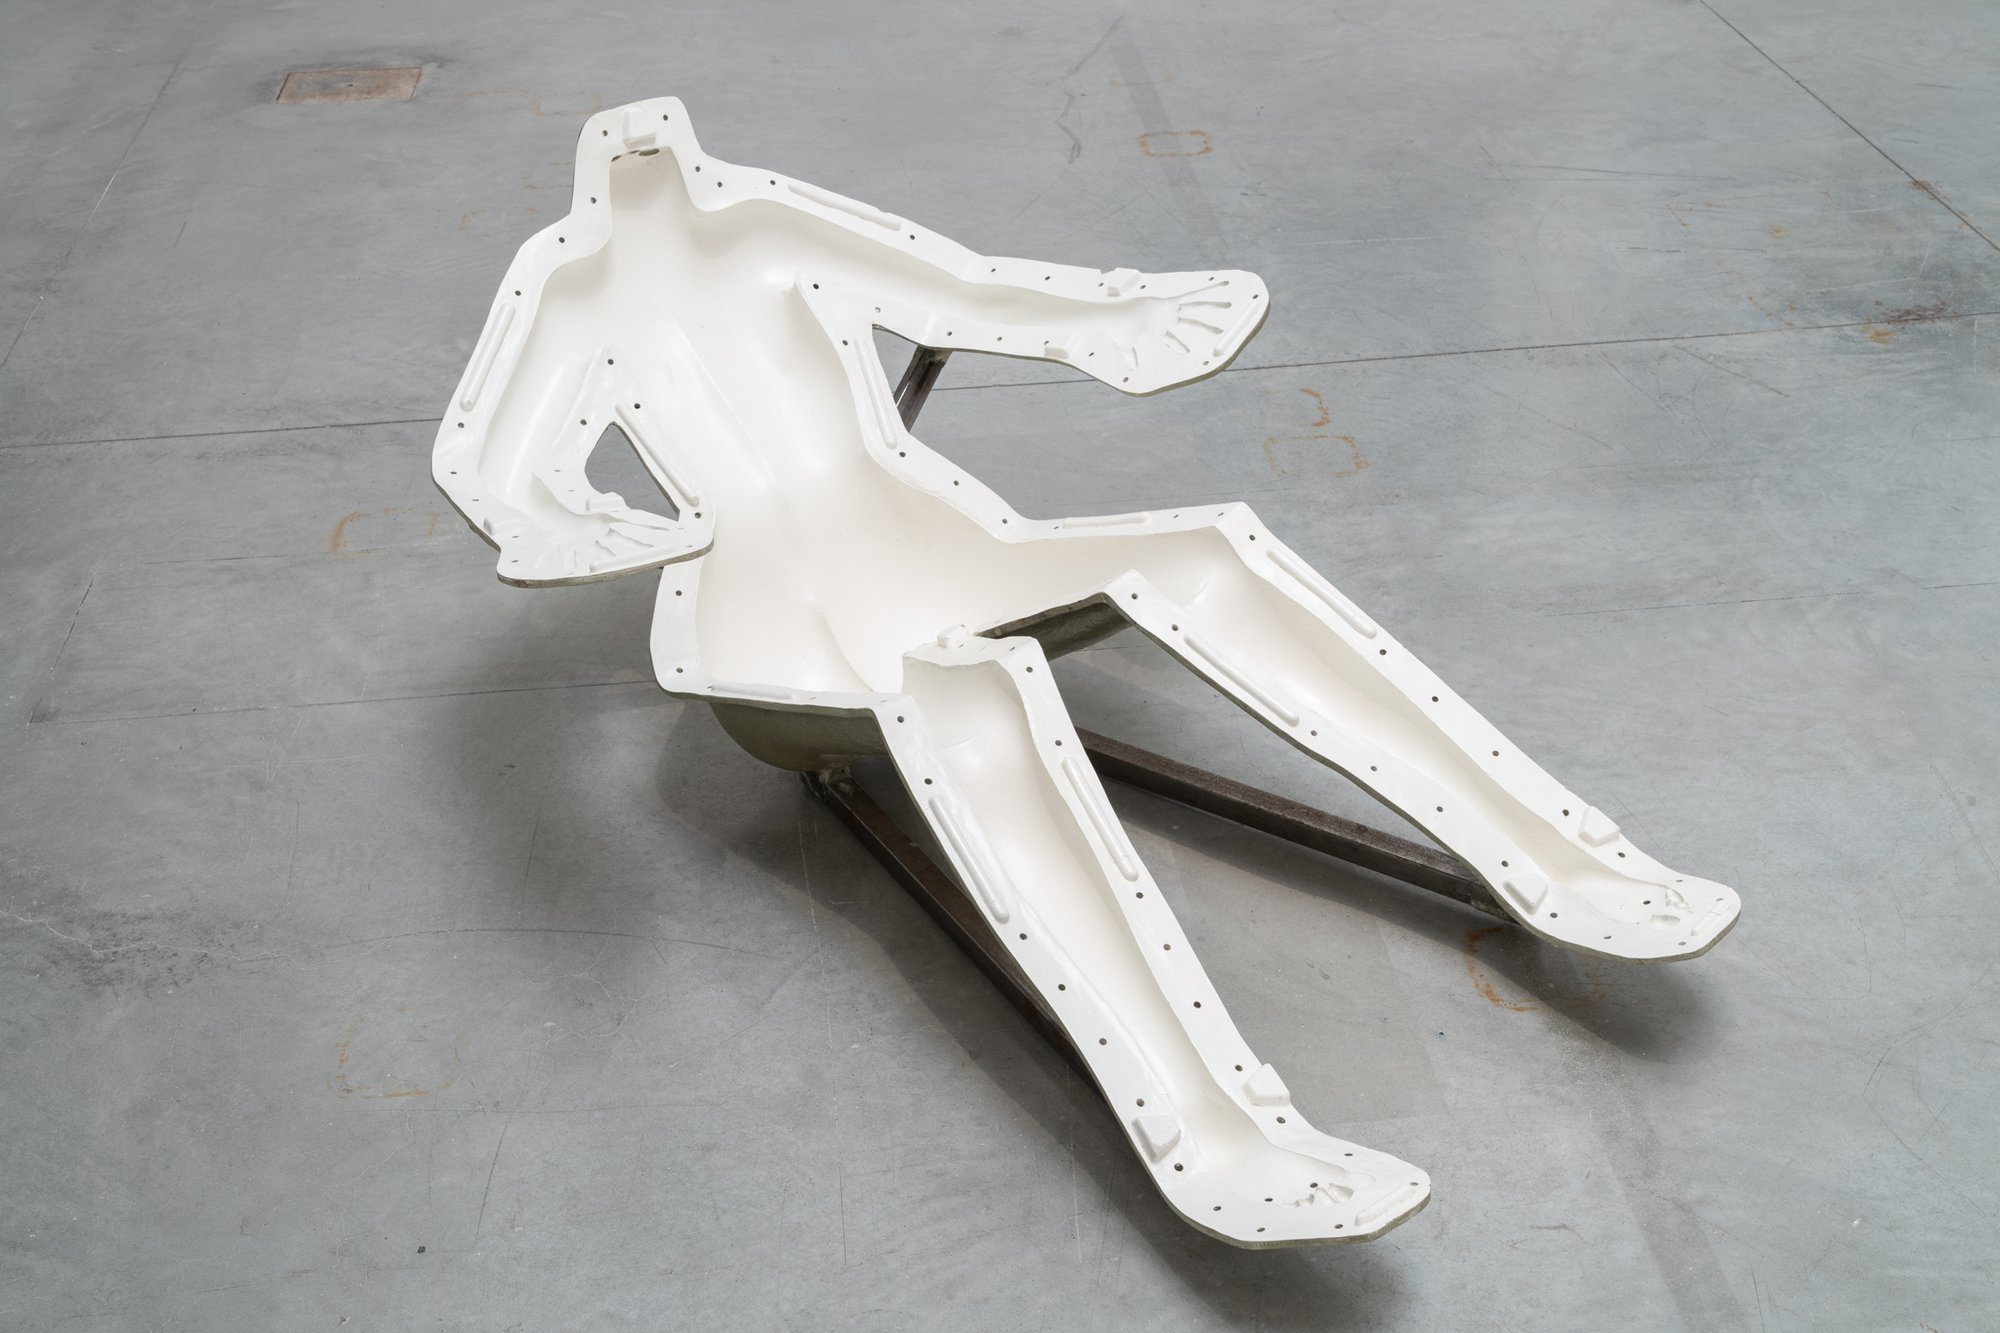 Sidsel Meineche Hansen, Daddy Mould, industrial cast in two parts made from fibreglass, resin and vaseline, 149 × 37 × 92 cm and 149 × 48 × 89 cm, 2018. Installation view, The Milk of Dreams, 59th International Art Exhibition – La Biennale di Venezia, Venice, 2022.